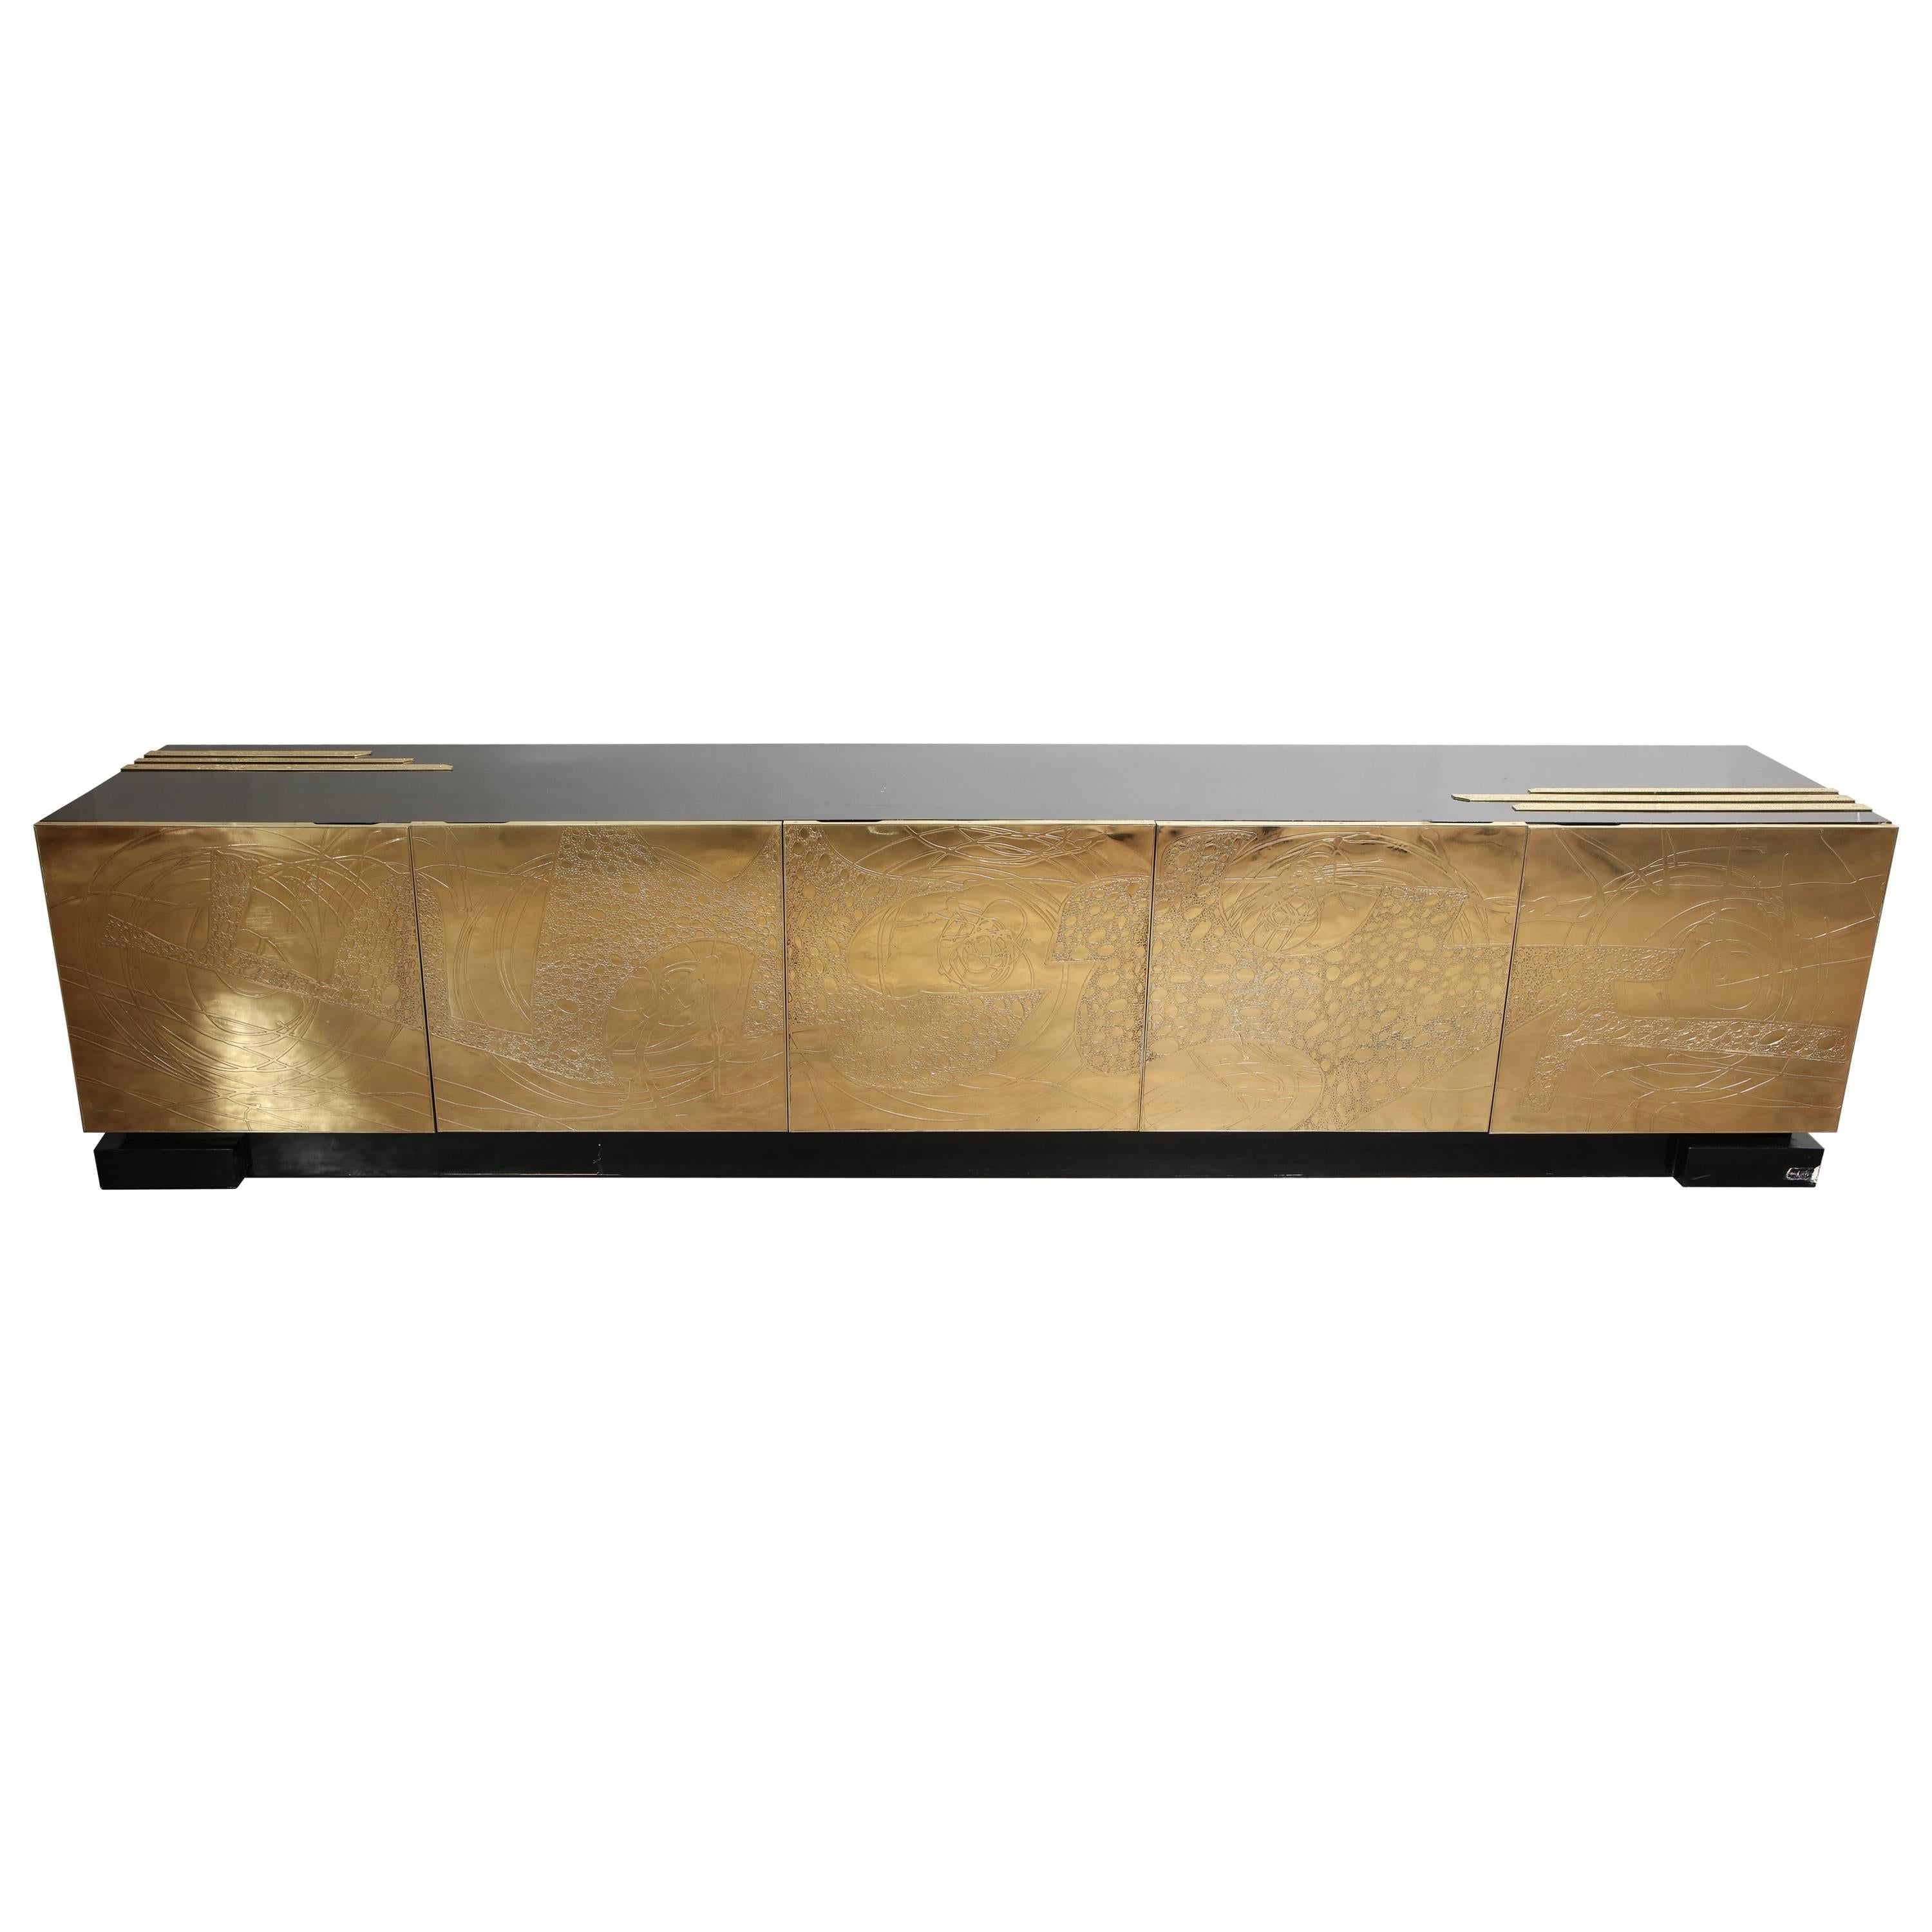 Monumental Belgian Side Board with Etched Brass Doors